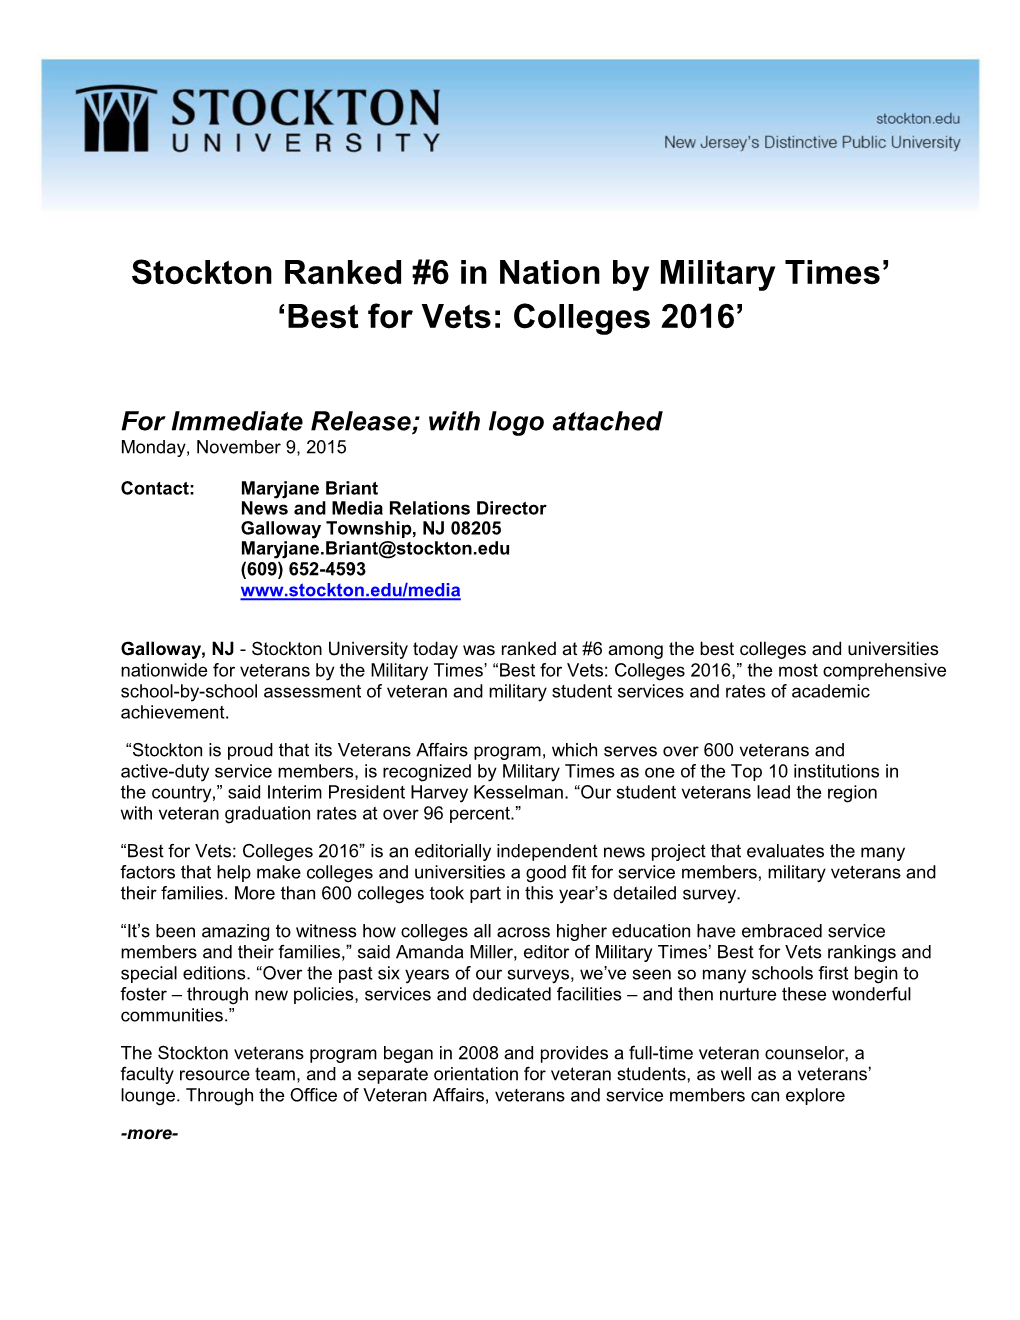 Stockton Ranked #6 in Nation by Military Times' 'Best for Vets